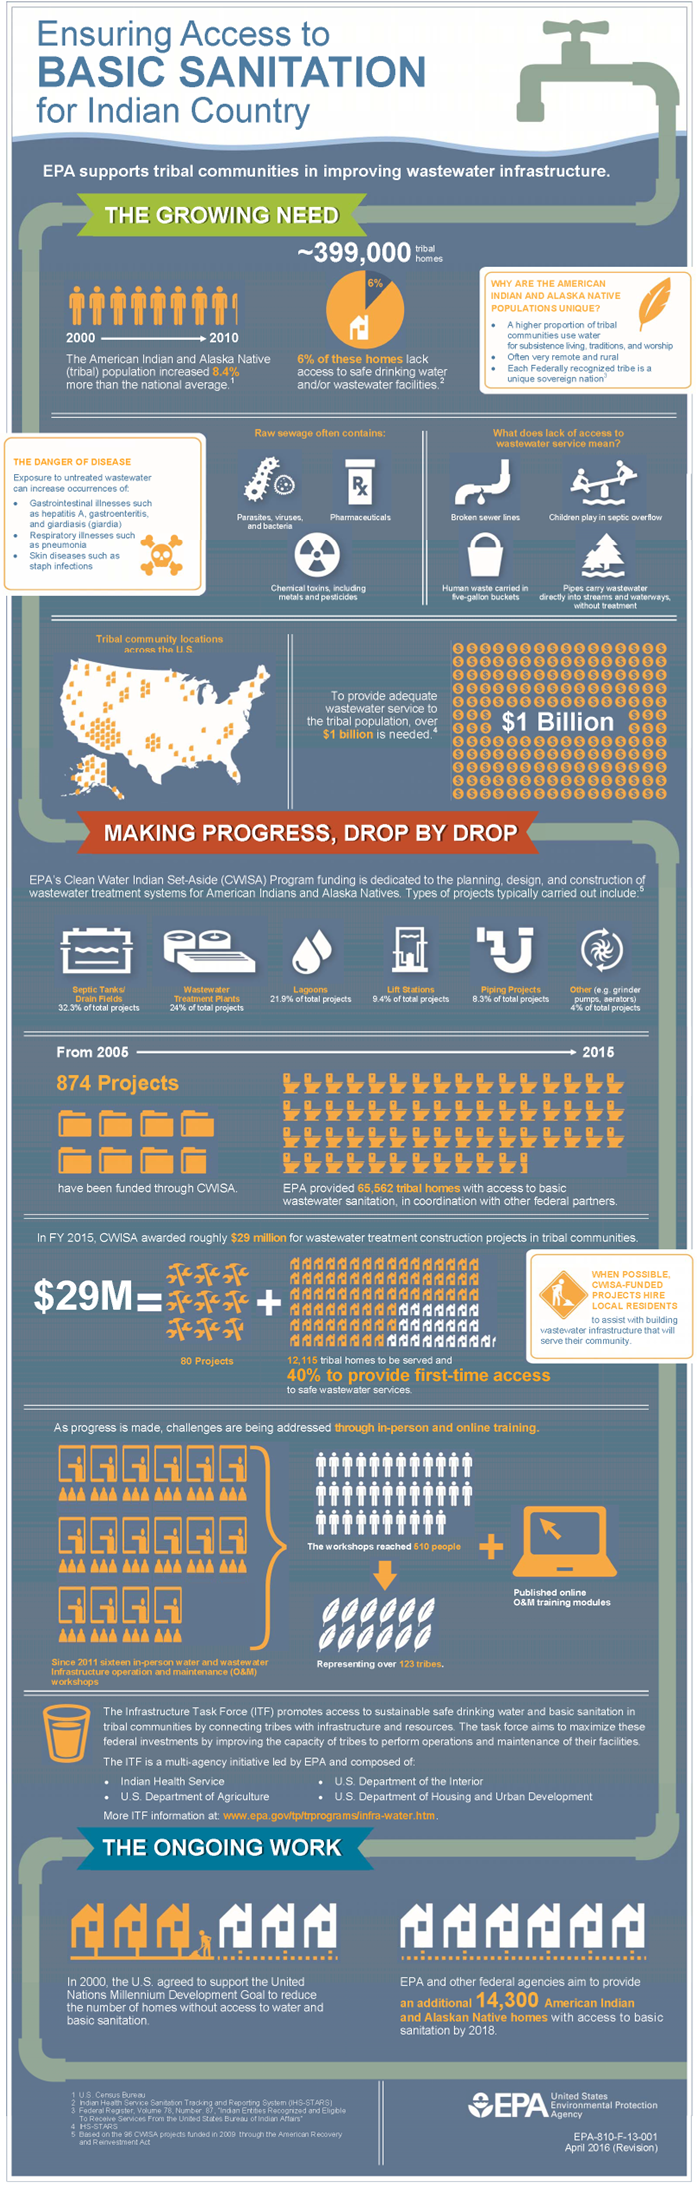 Ensuring Access to Basic Sanitation for Indian Country Infographic